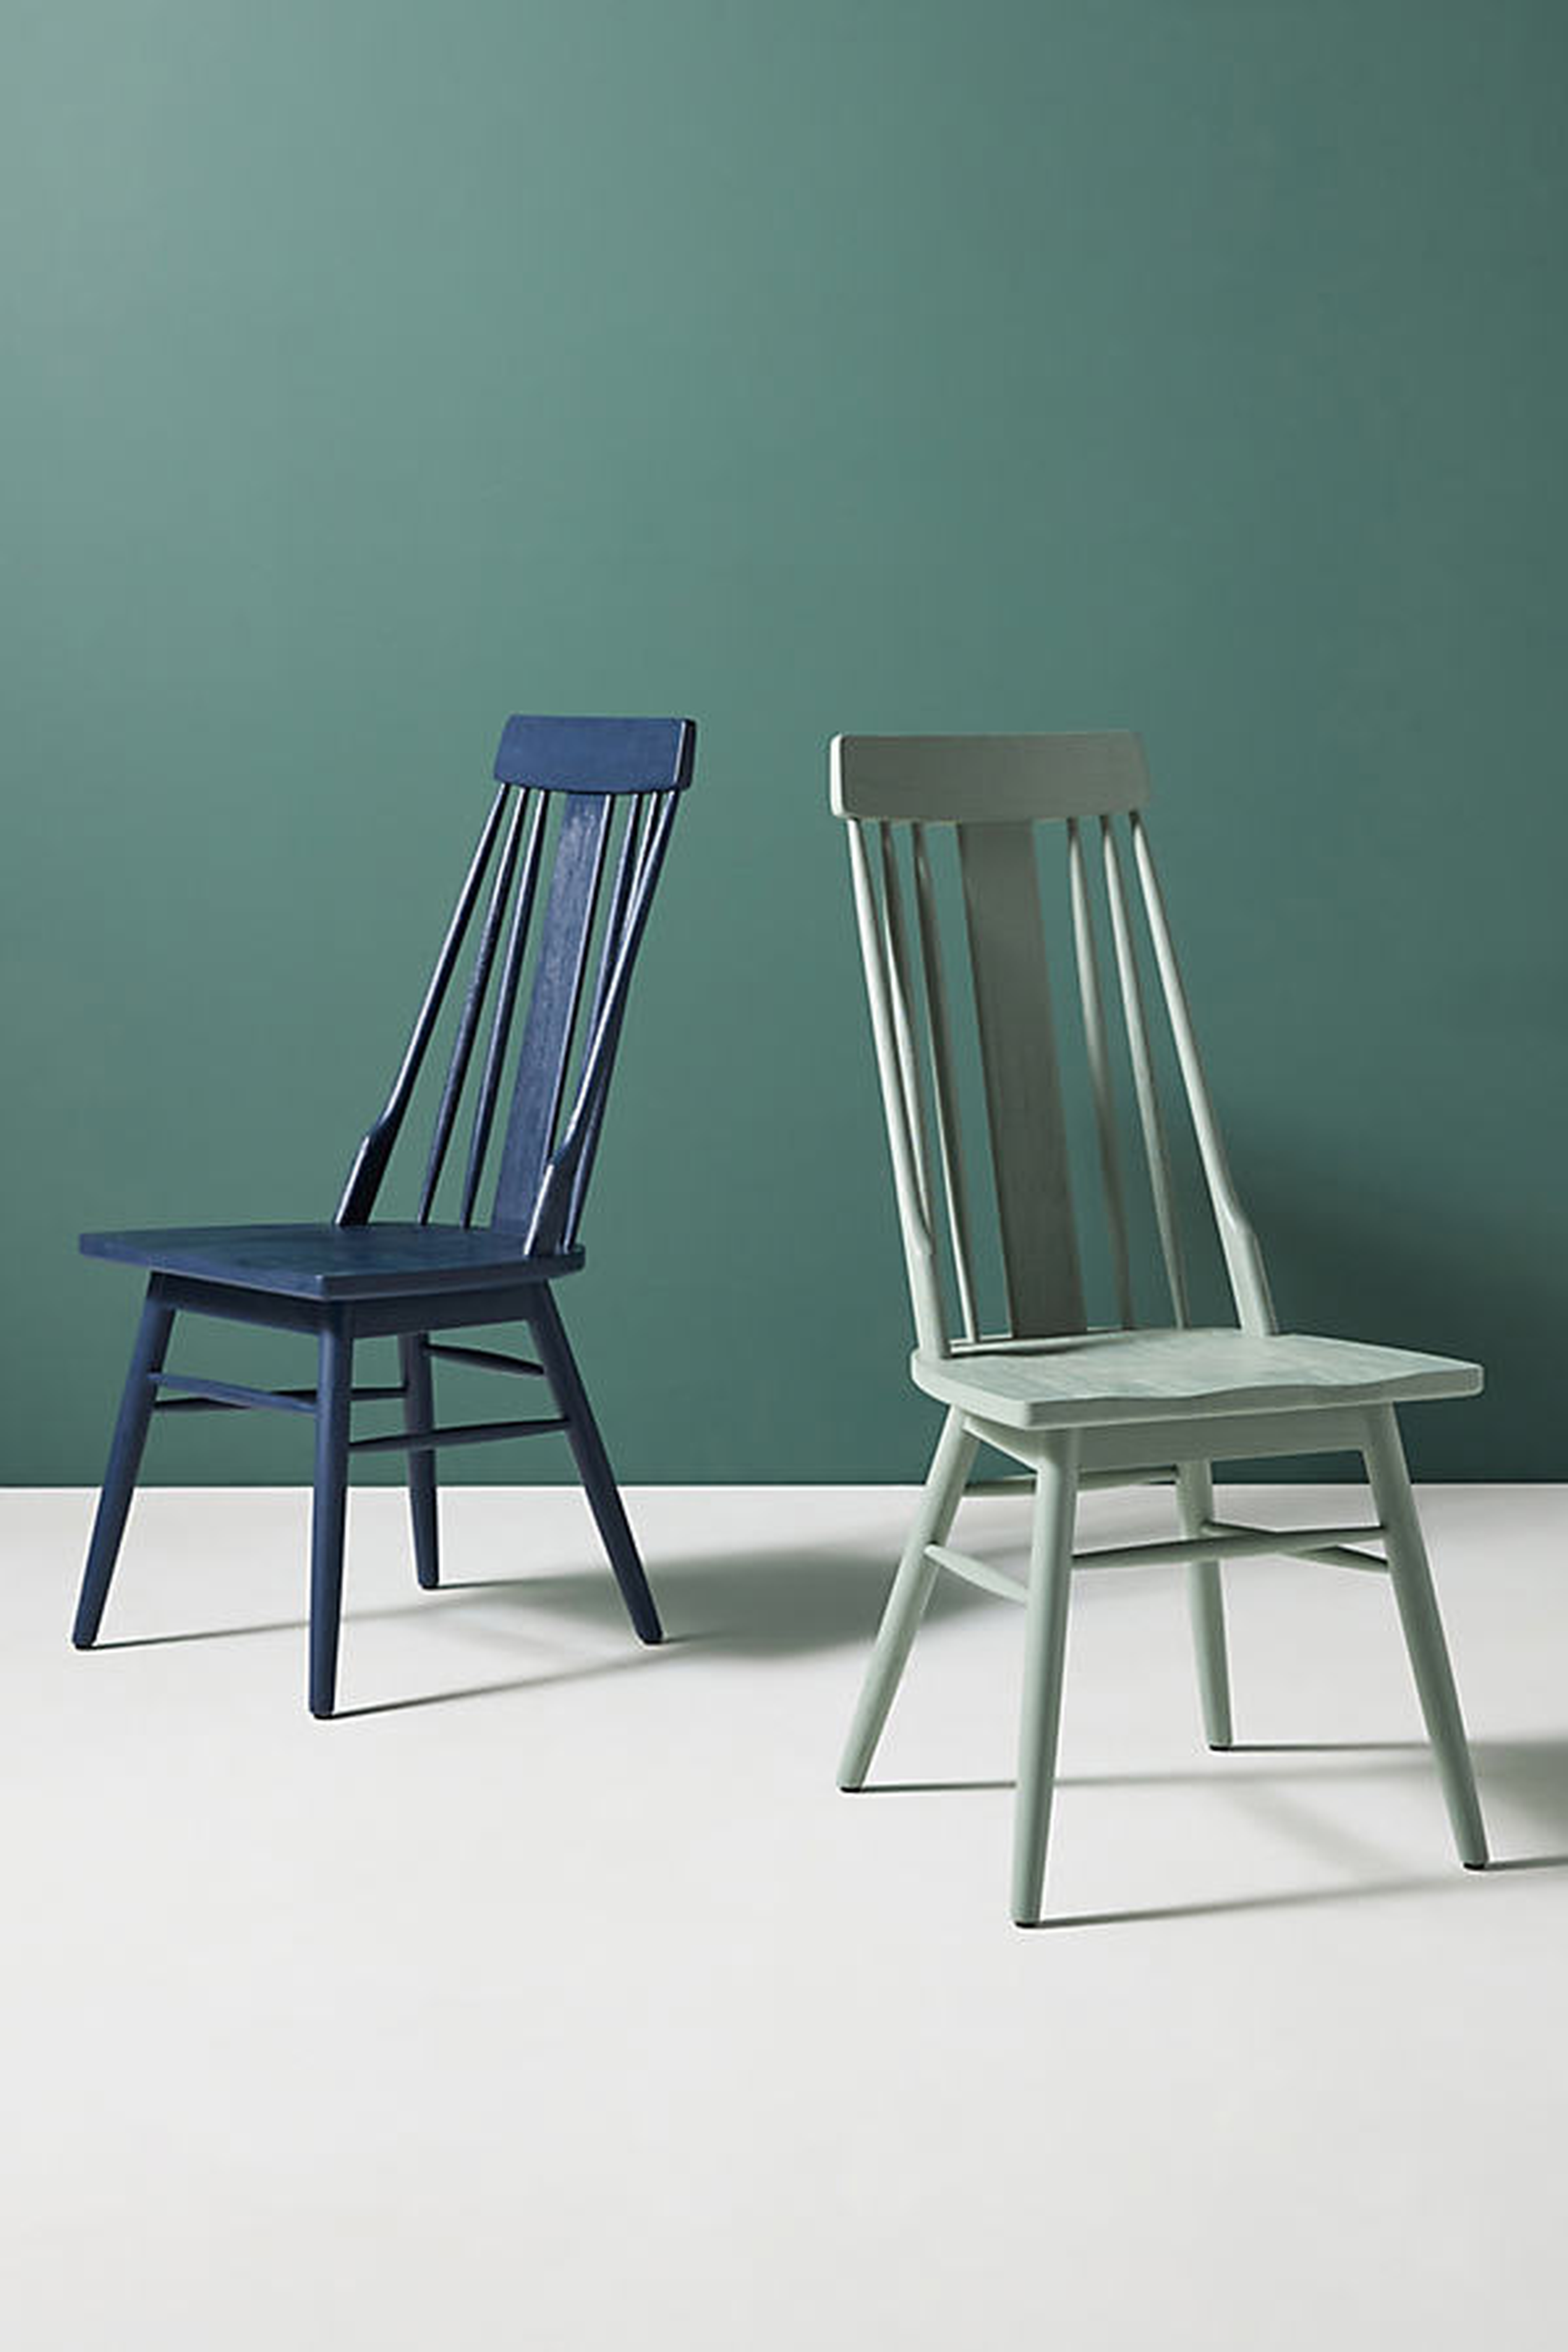 Delancey Dining Chair By Anthropologie in Mint - Anthropologie